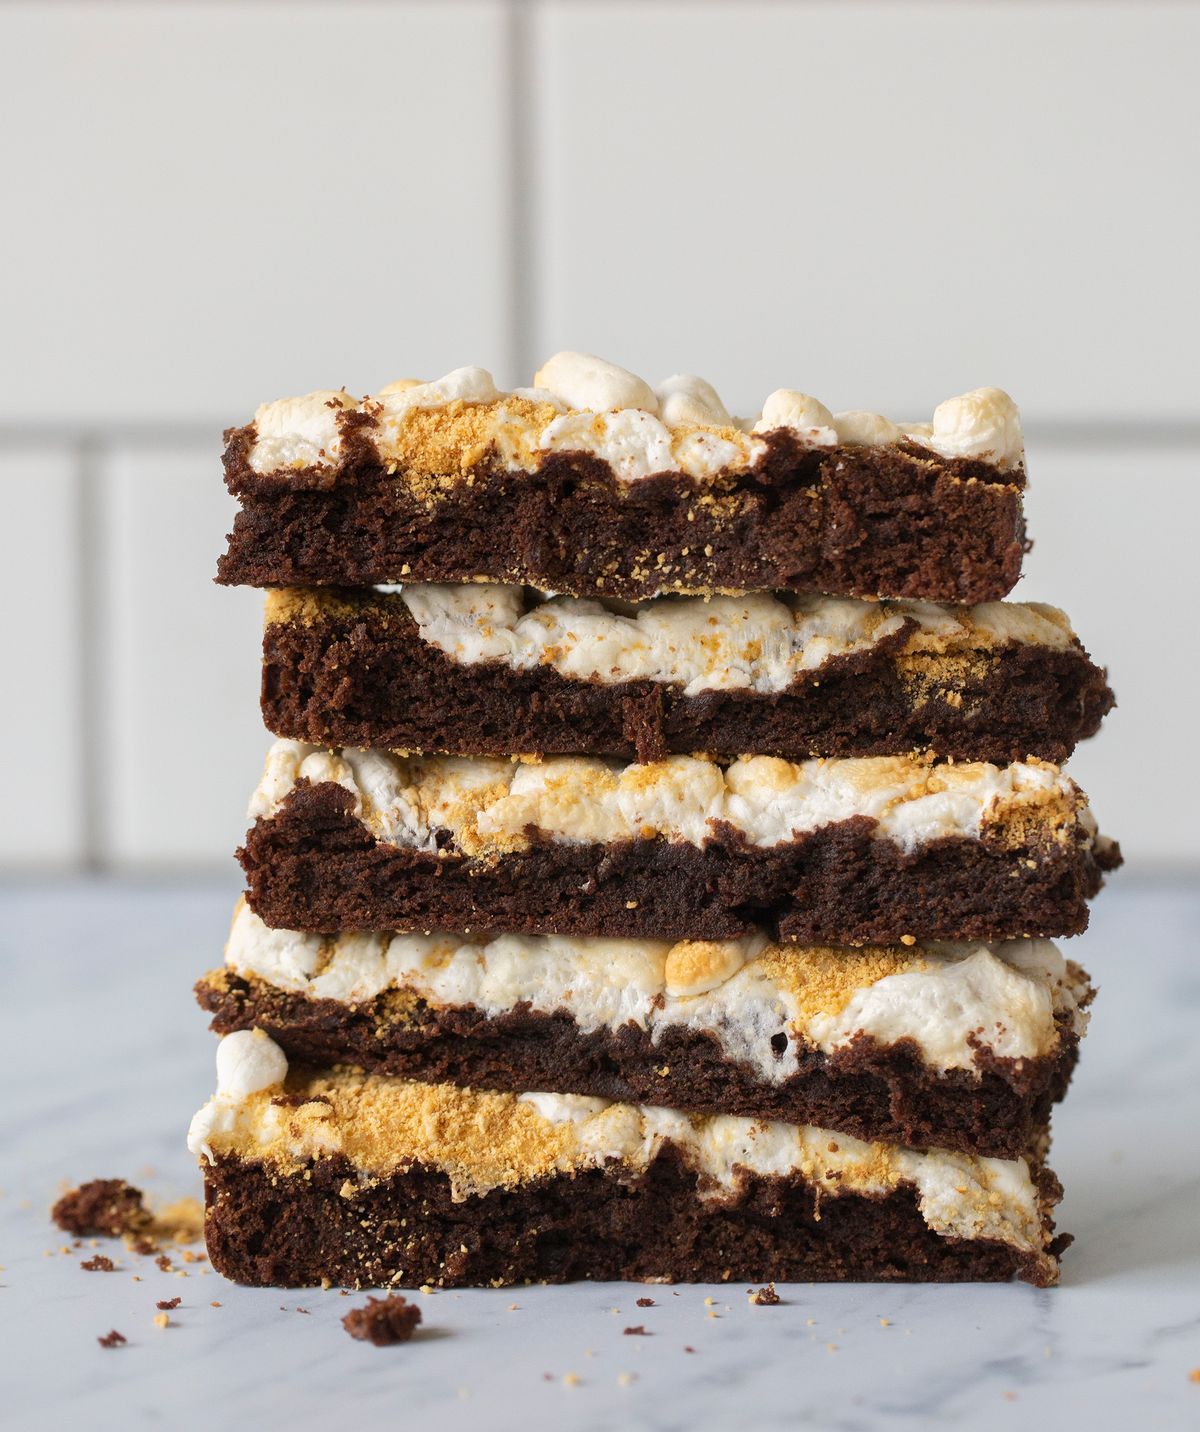 Relax this long weekend with THC-infused s'mores brownies